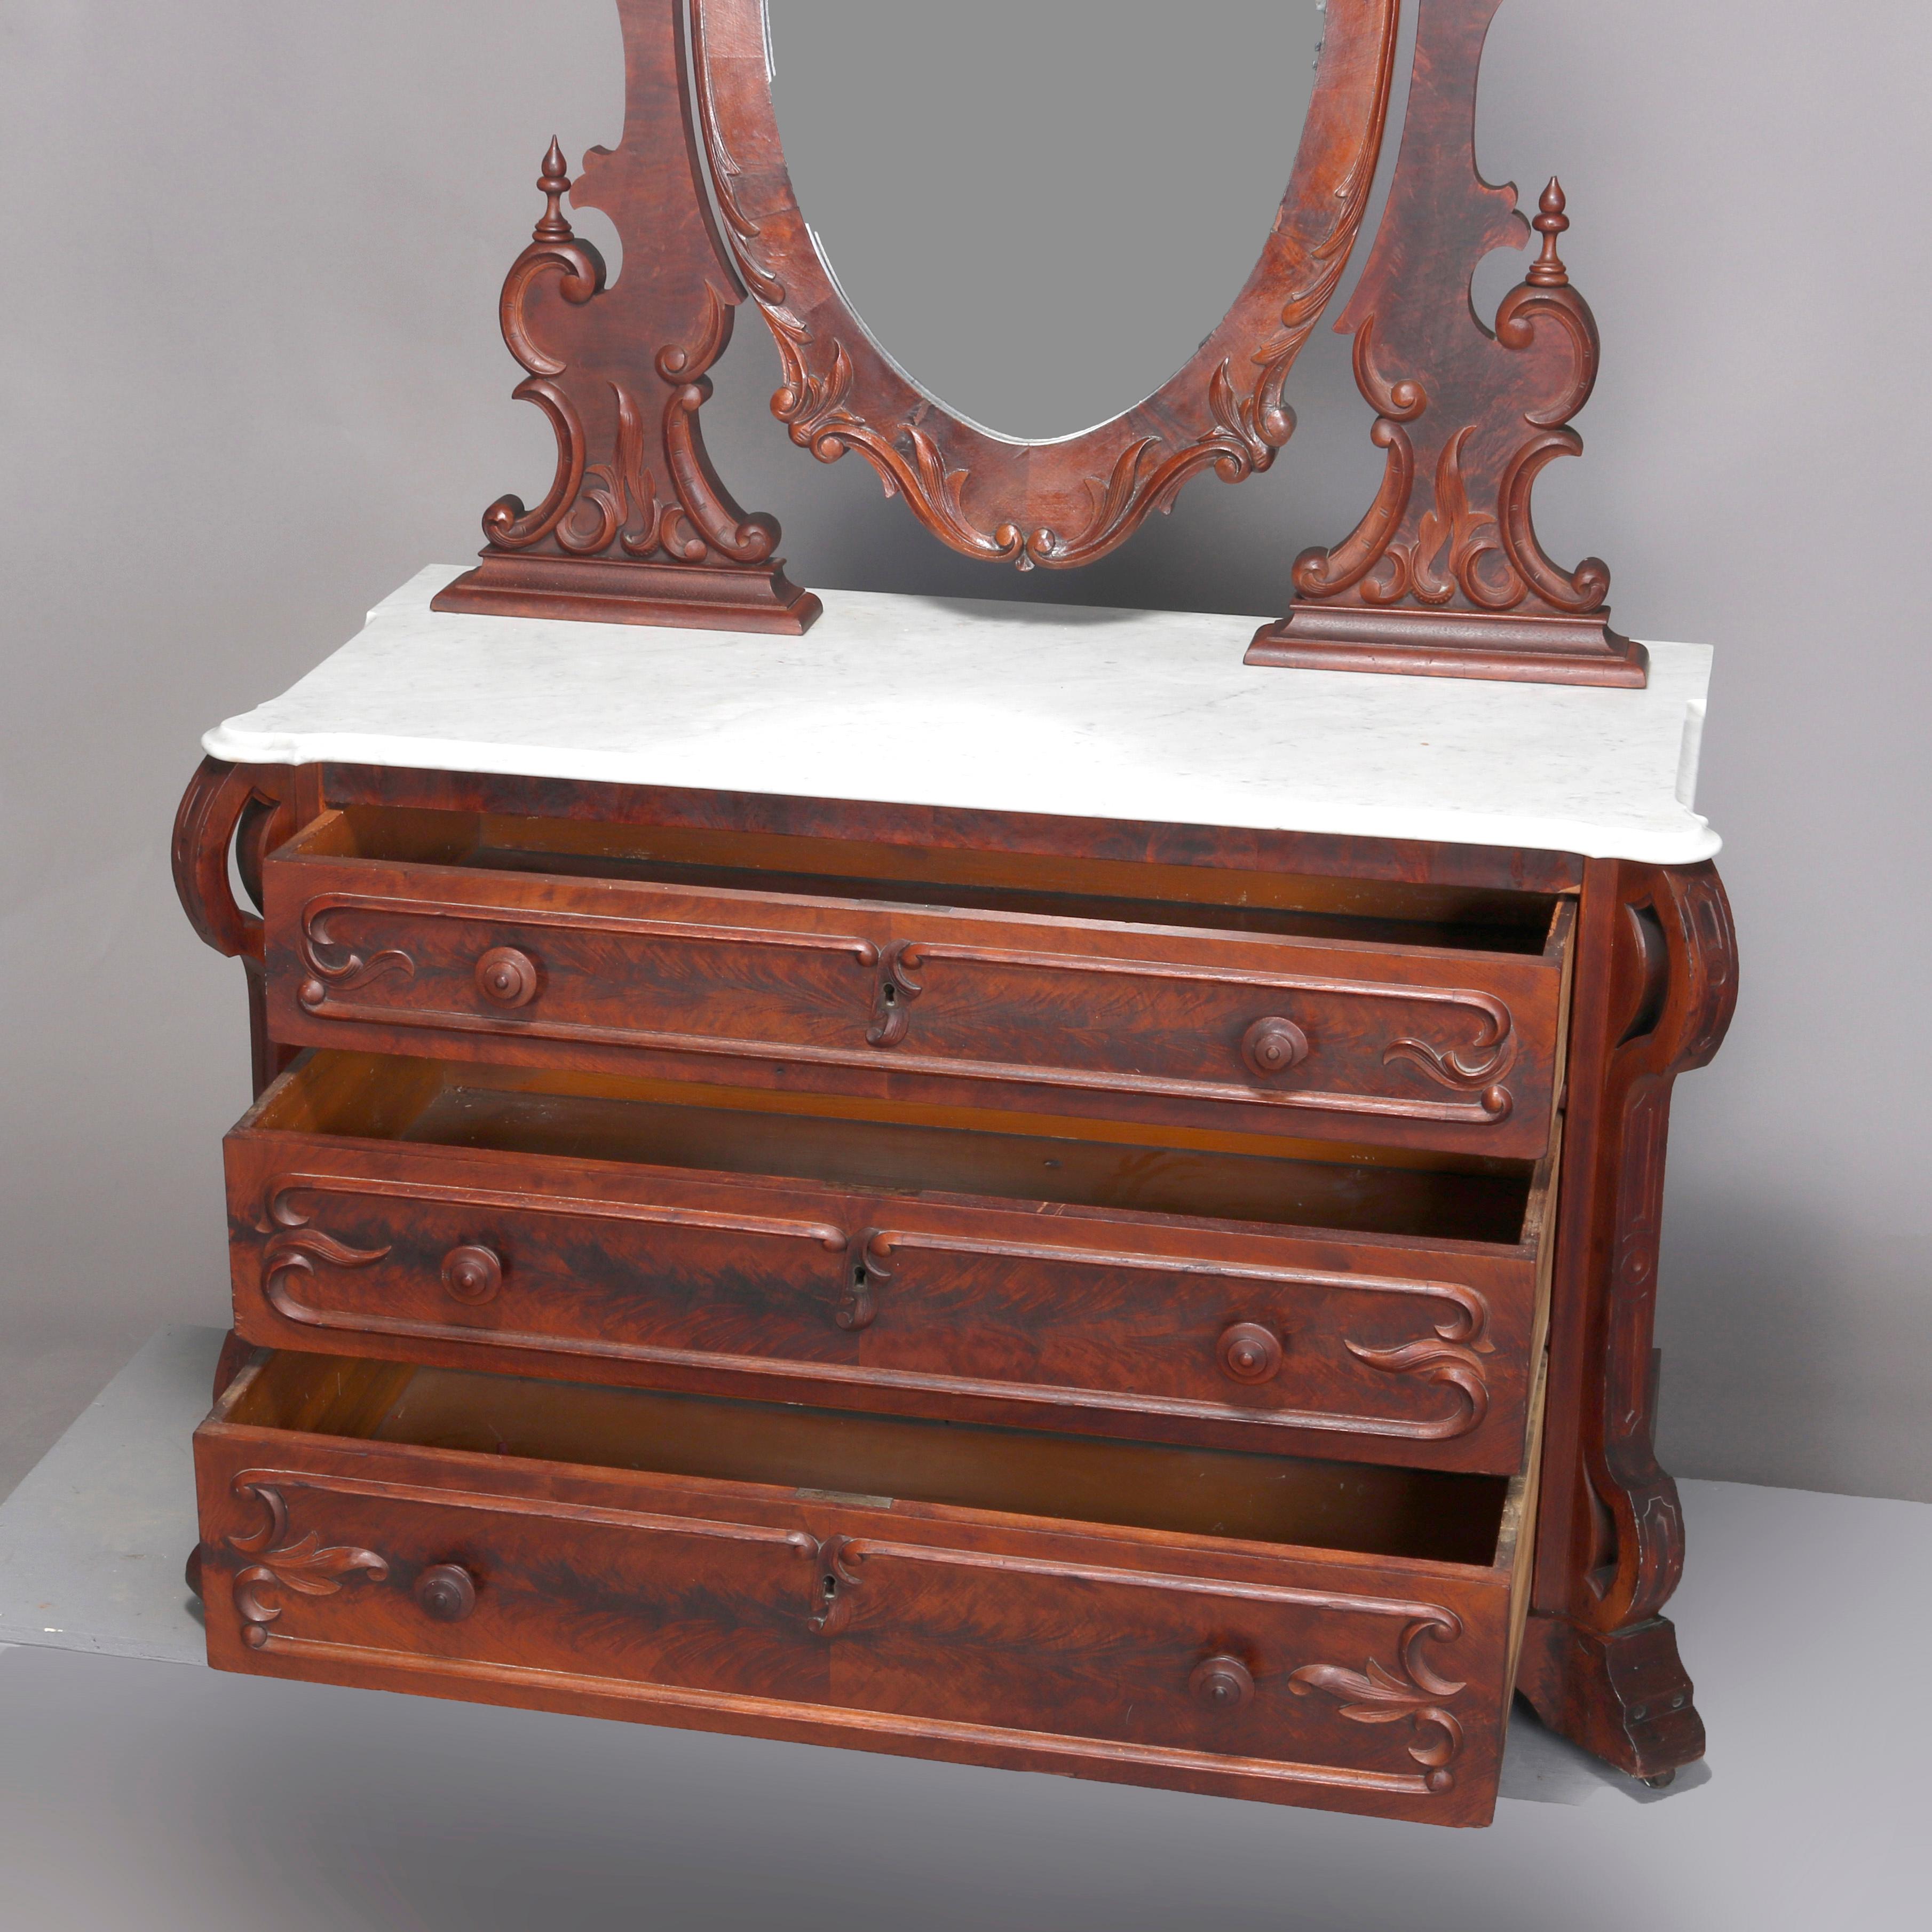 Beveled Antique Renaissance Revival Flame Mahogany and Marble Dresser, circa 1880 For Sale